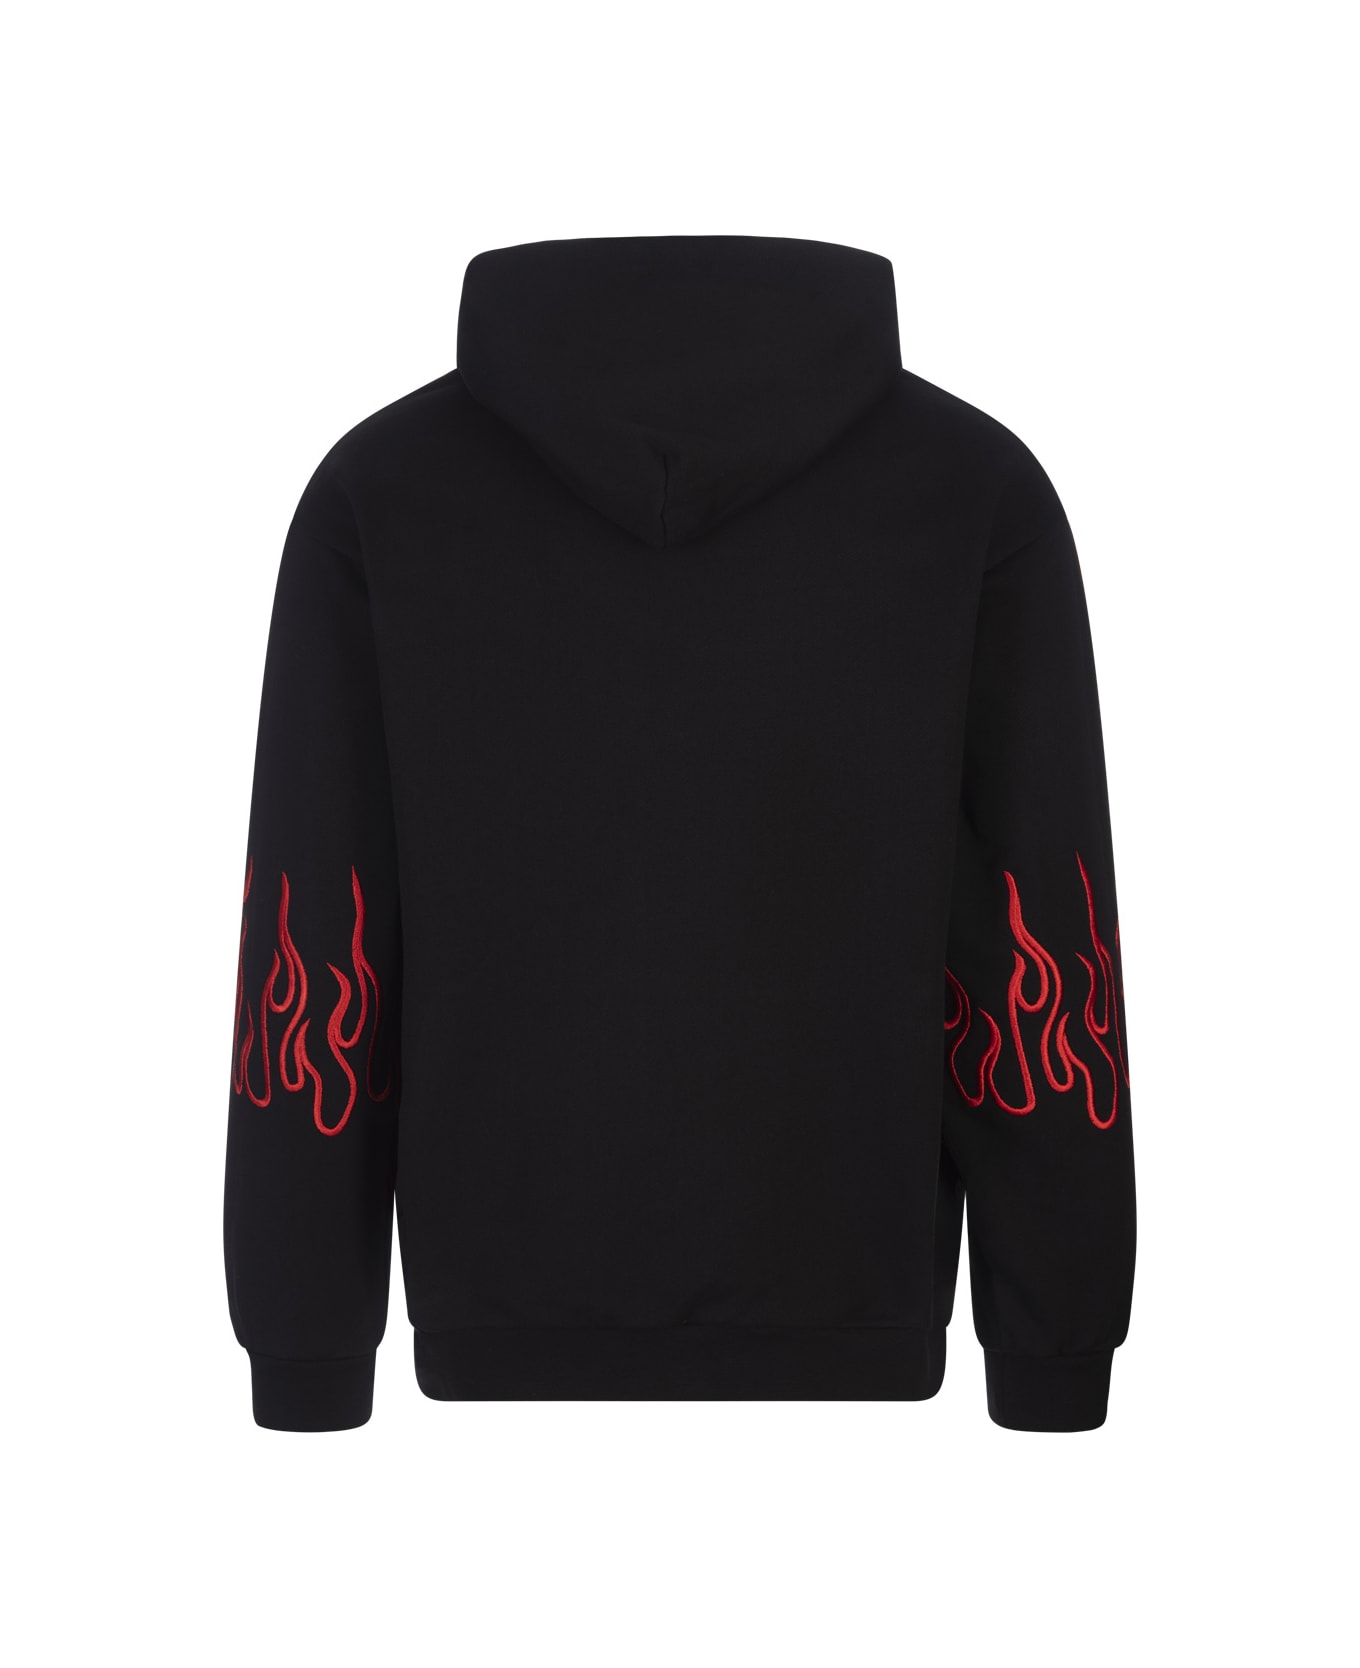 Vision of Super Black Hoodie With Red Embroidered Flames - Black フリース